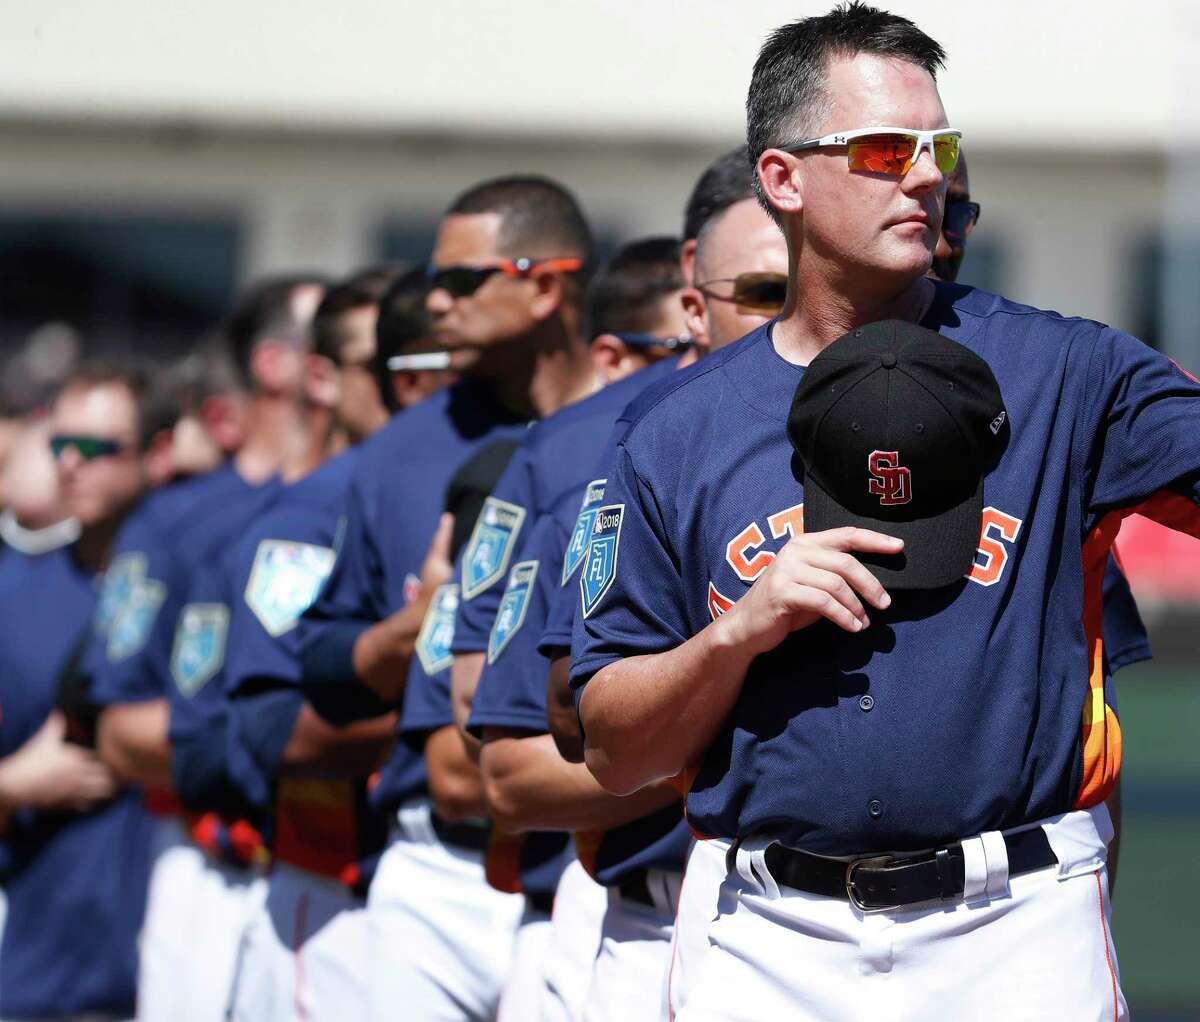 Houston Astros manager A.J. Hinch holds the Stoneman Douglas Eagles baseball hat over his heart during the National Anthem before the start of the Houston Astros spring training game against the Nationals at The Fitteam Ballpark of the Palm Beaches, Friday, Feb. 23, 2018, in West Palm Beach. ( Karen Warren / Houston Chronicle )